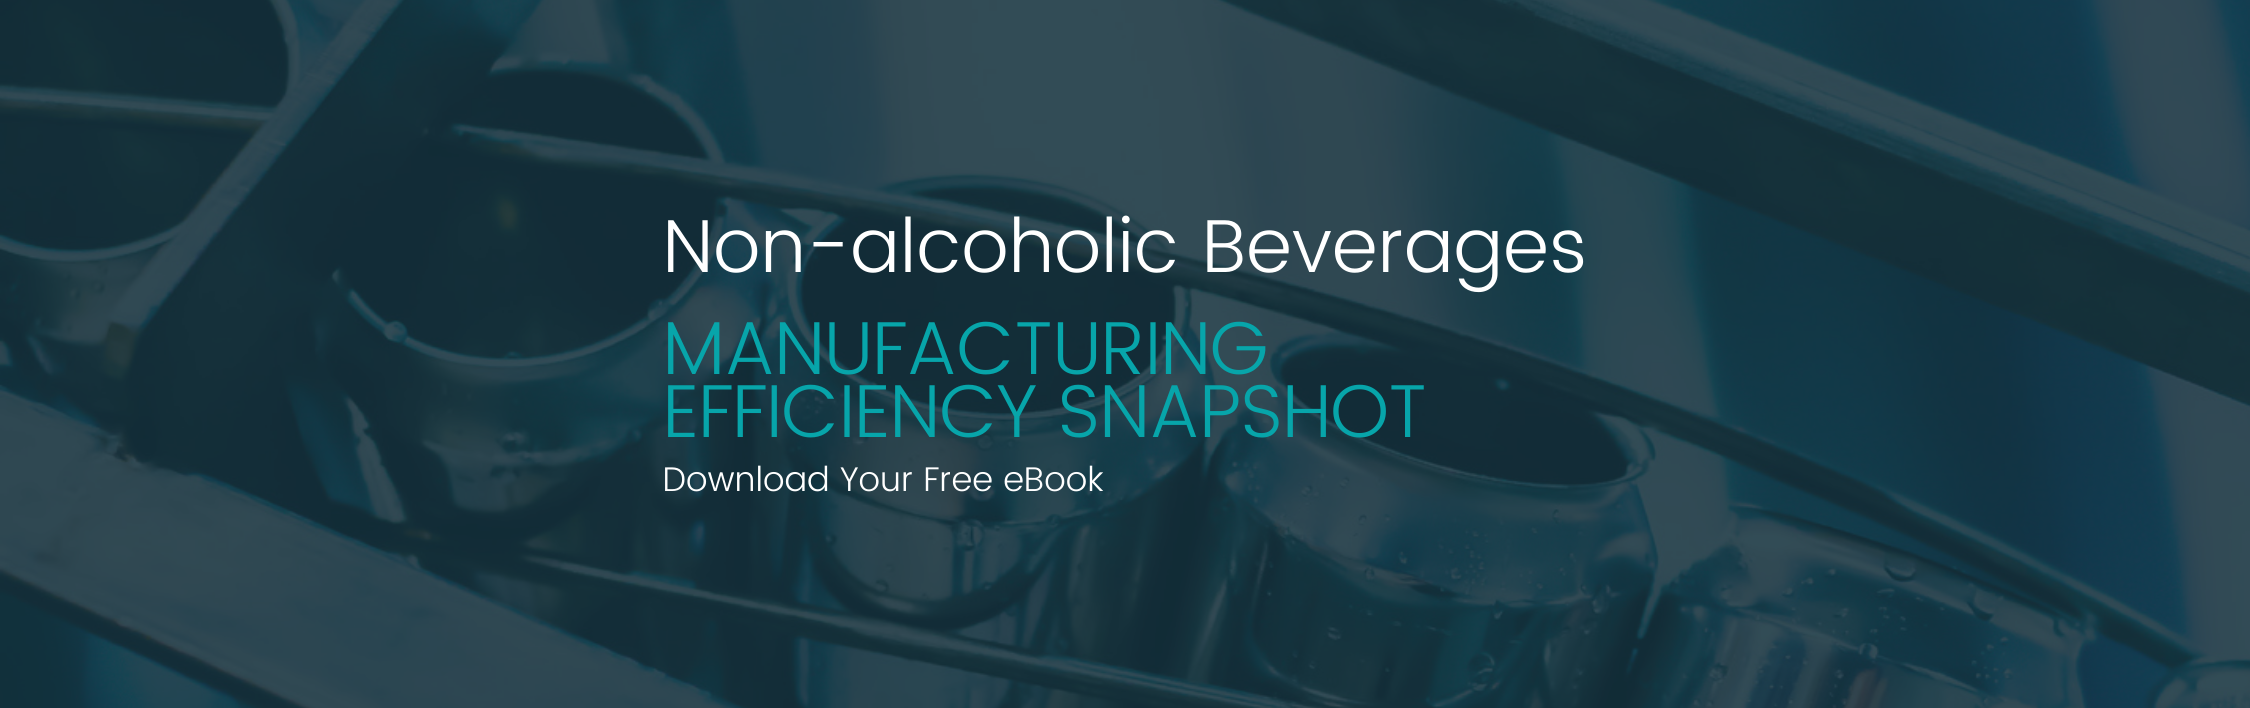 Non-alcoholic Beverages manufacturing efficiency snapshot MOB